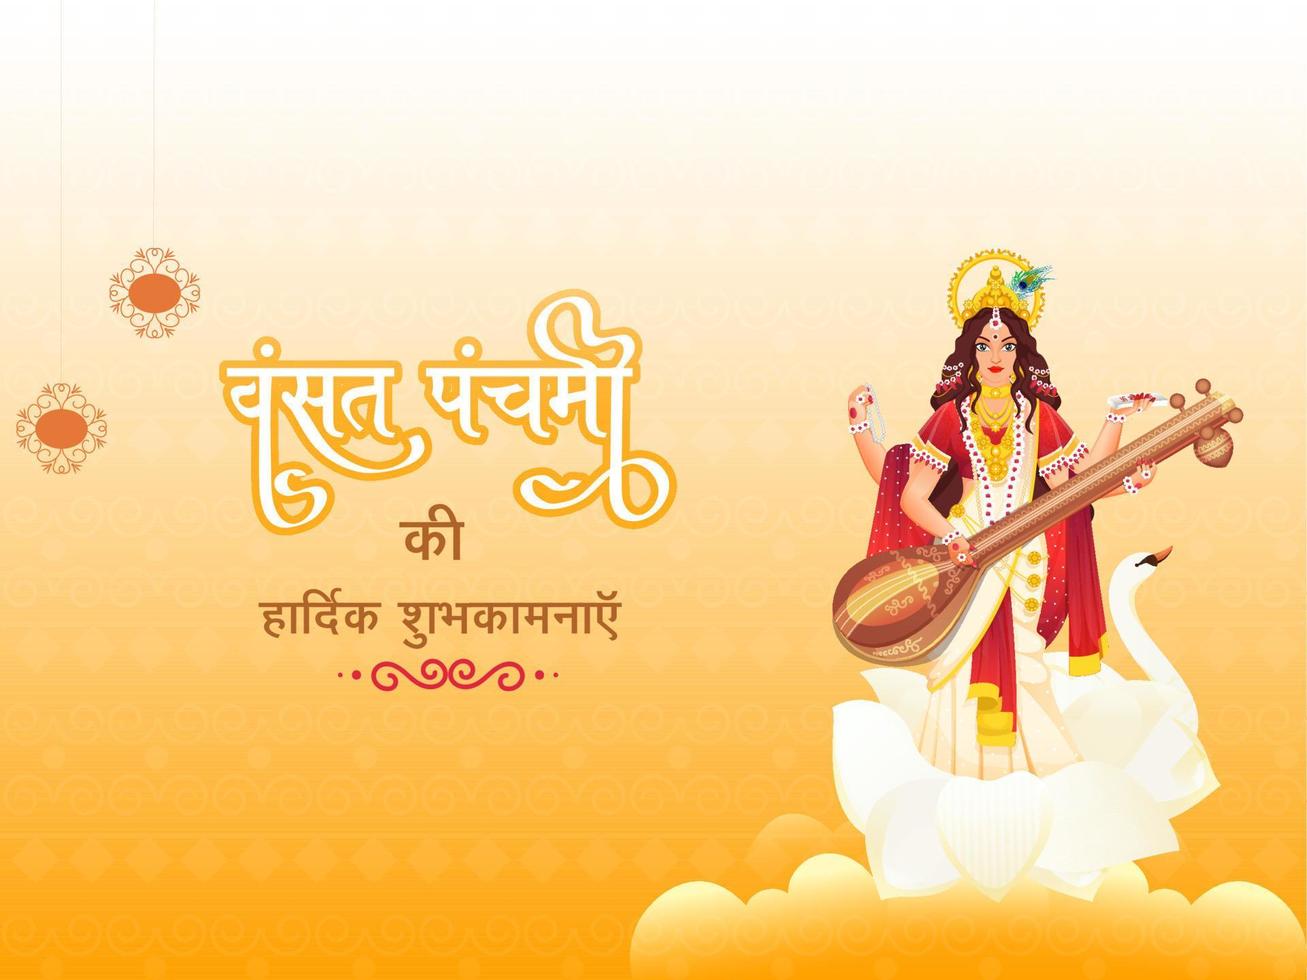 Hindi Text Best Wishes Of Vasant Panchami With Goddess Saraswati Sculpture On Glossy Yellow Background. vector